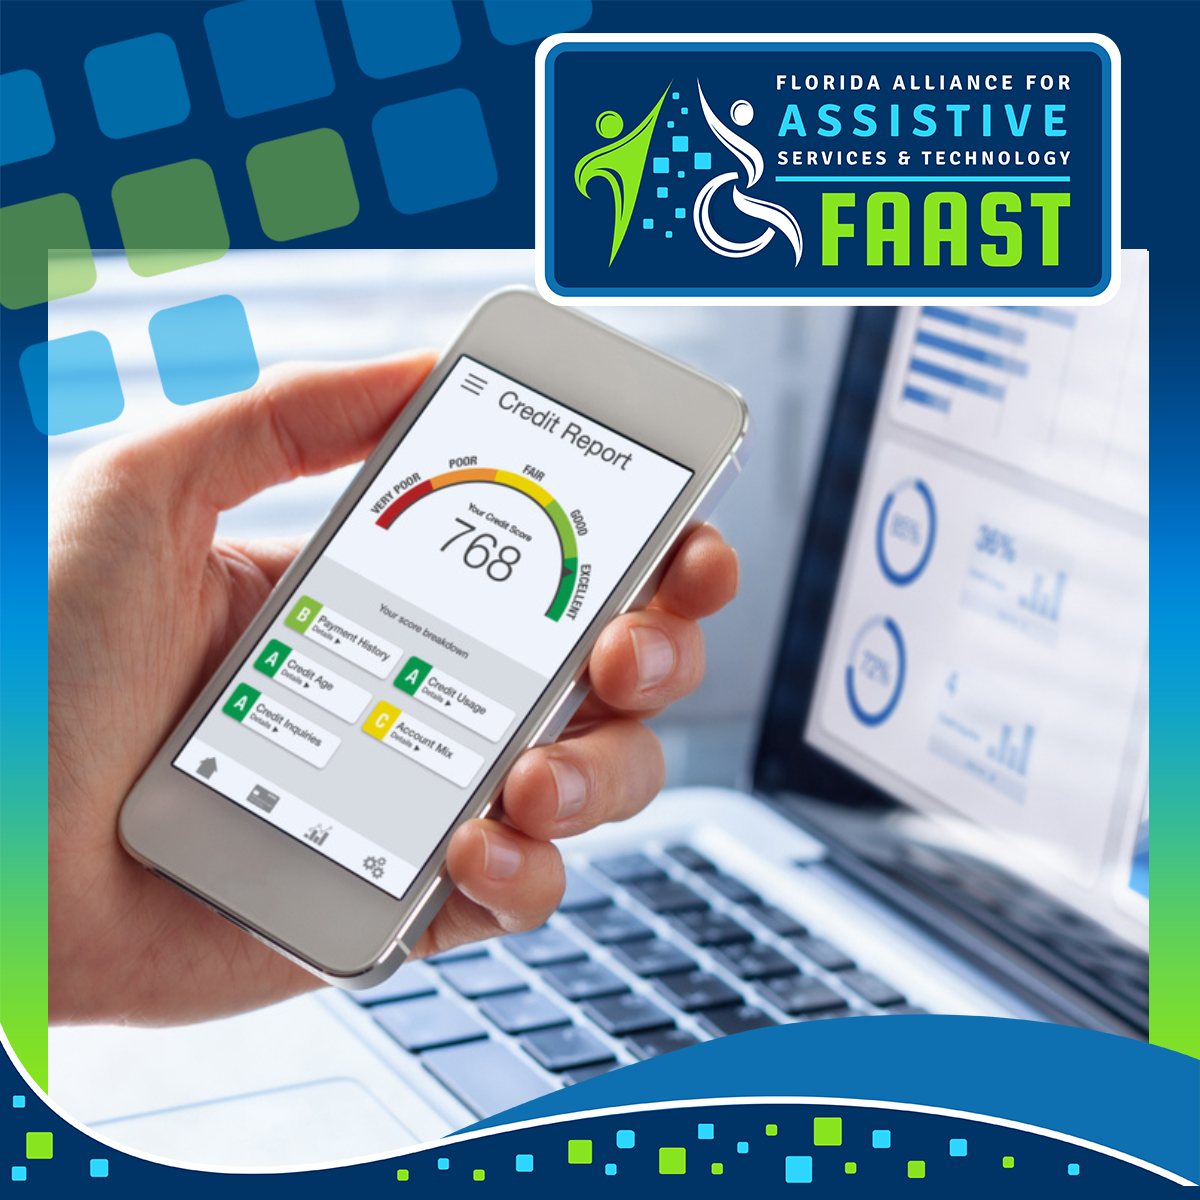 FAAST, Florida Alliance for Assistive Services & Technology graphic showing a credit report score on a mobile device. Text reads: Credit Report, 768.